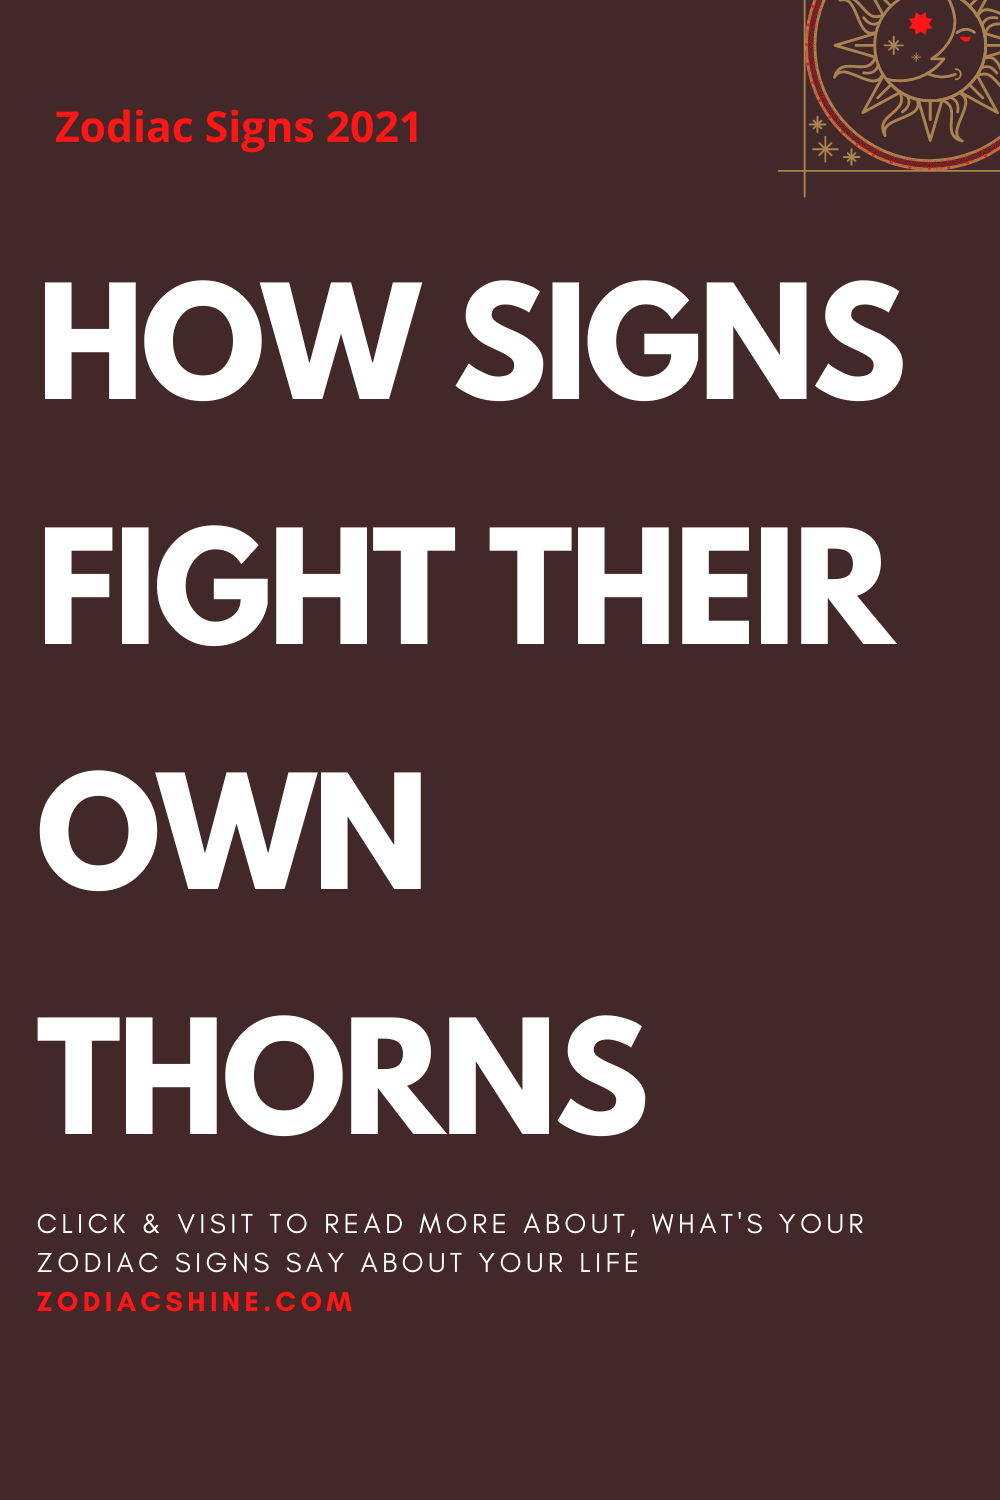 HOW SIGNS FIGHT THEIR OWN THORNS